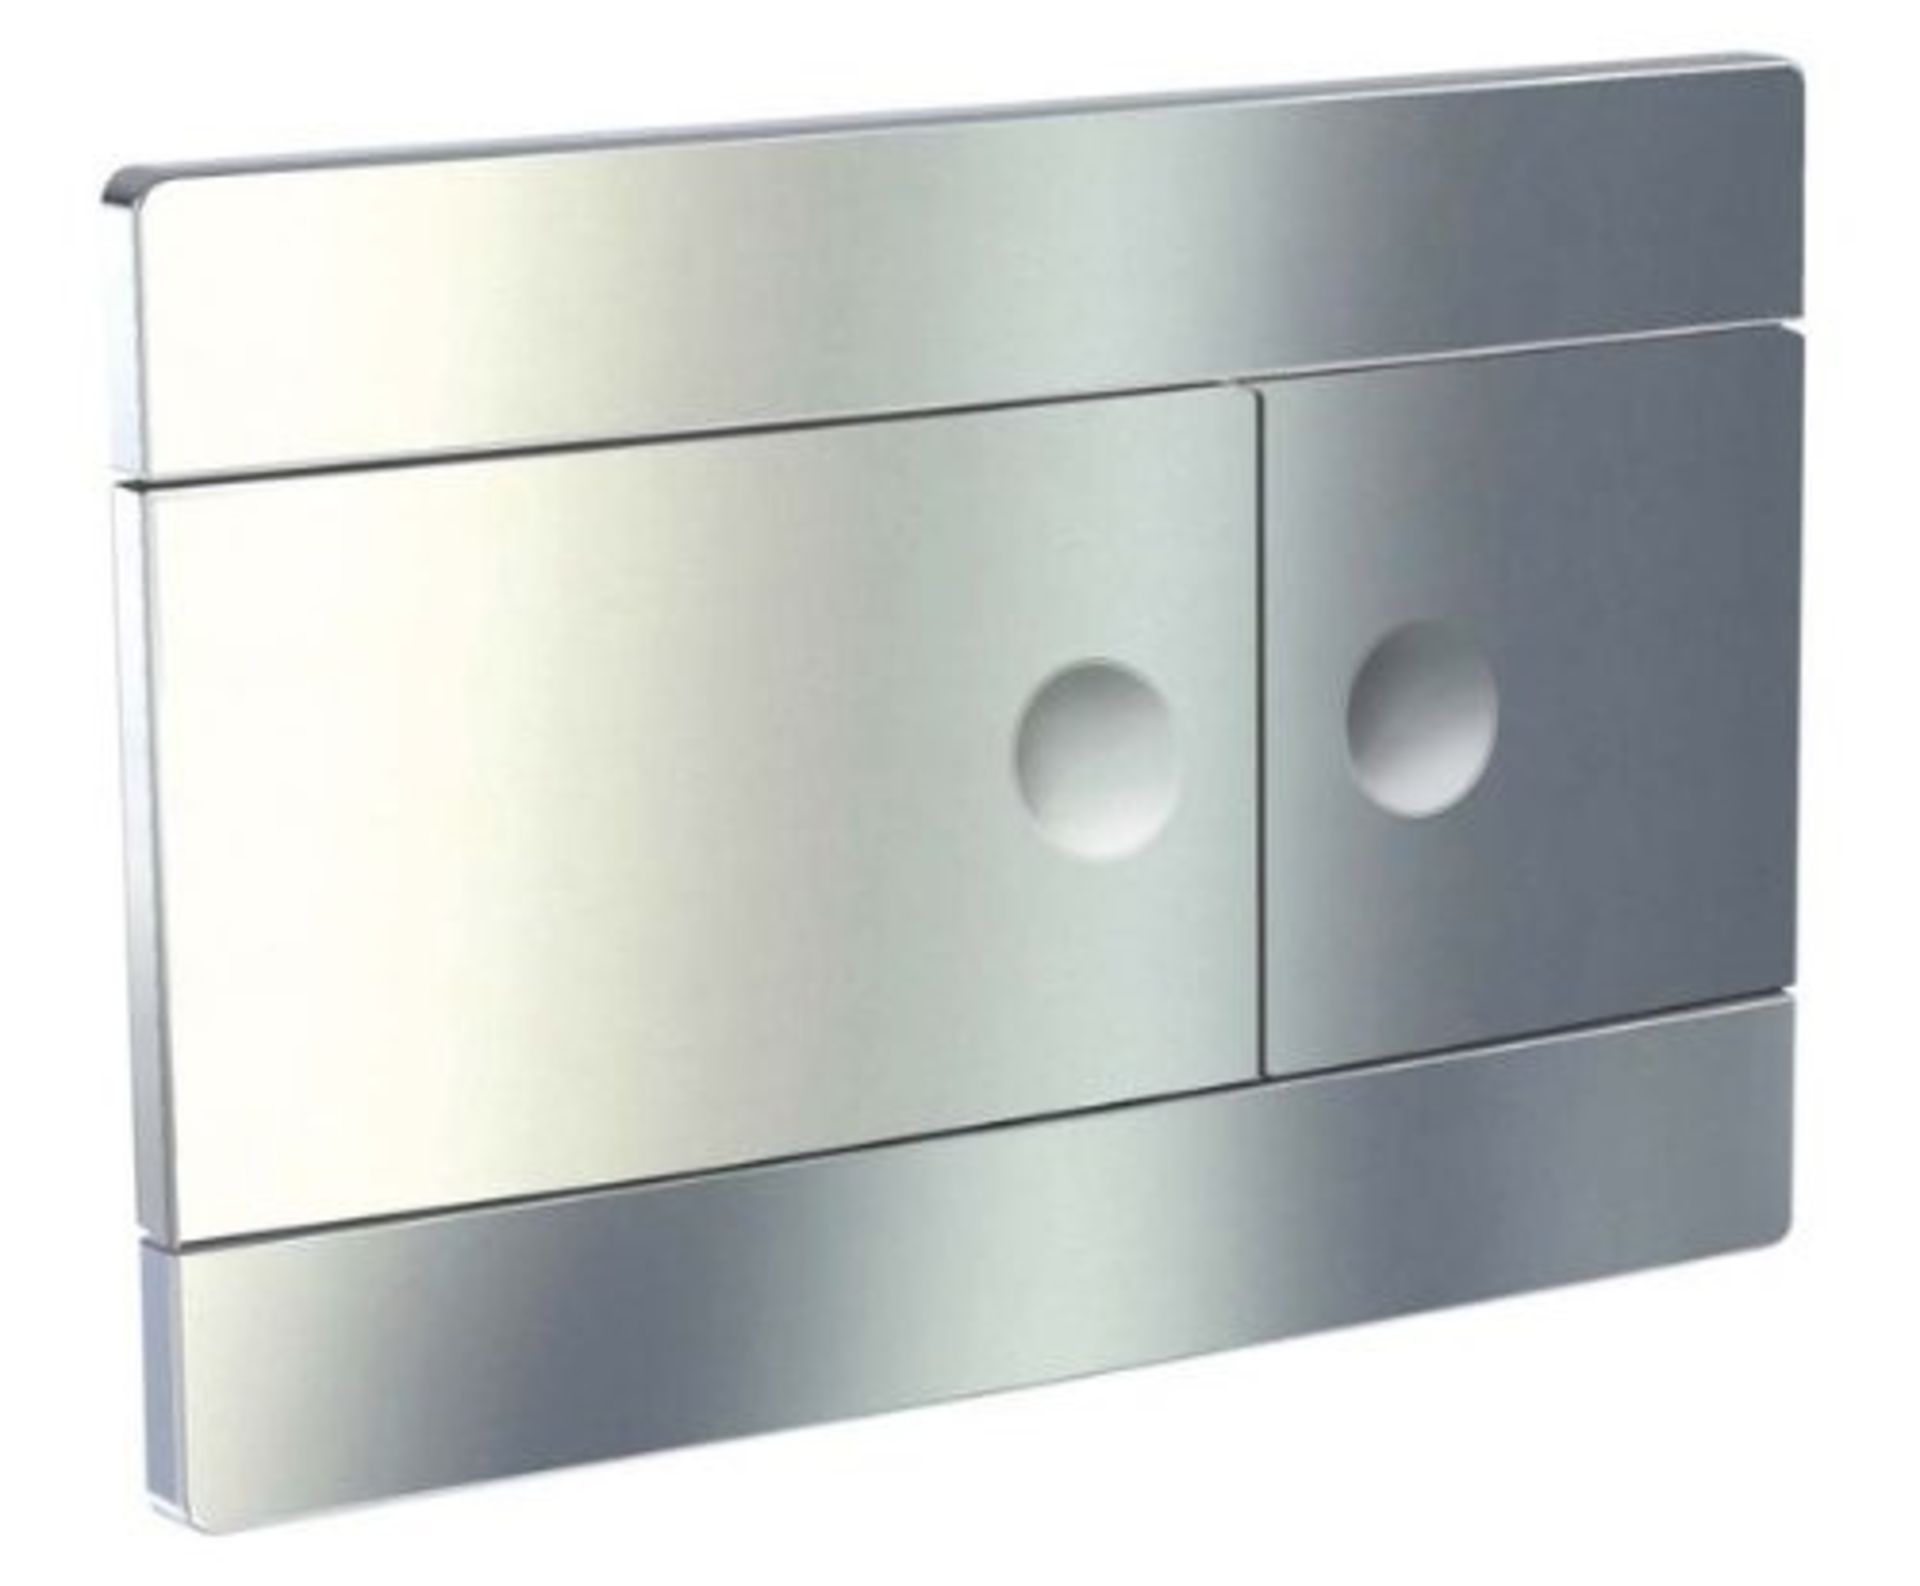 Roca Chrome Dual Flush Plate for 820 Concealed Cistern. New & boxed.